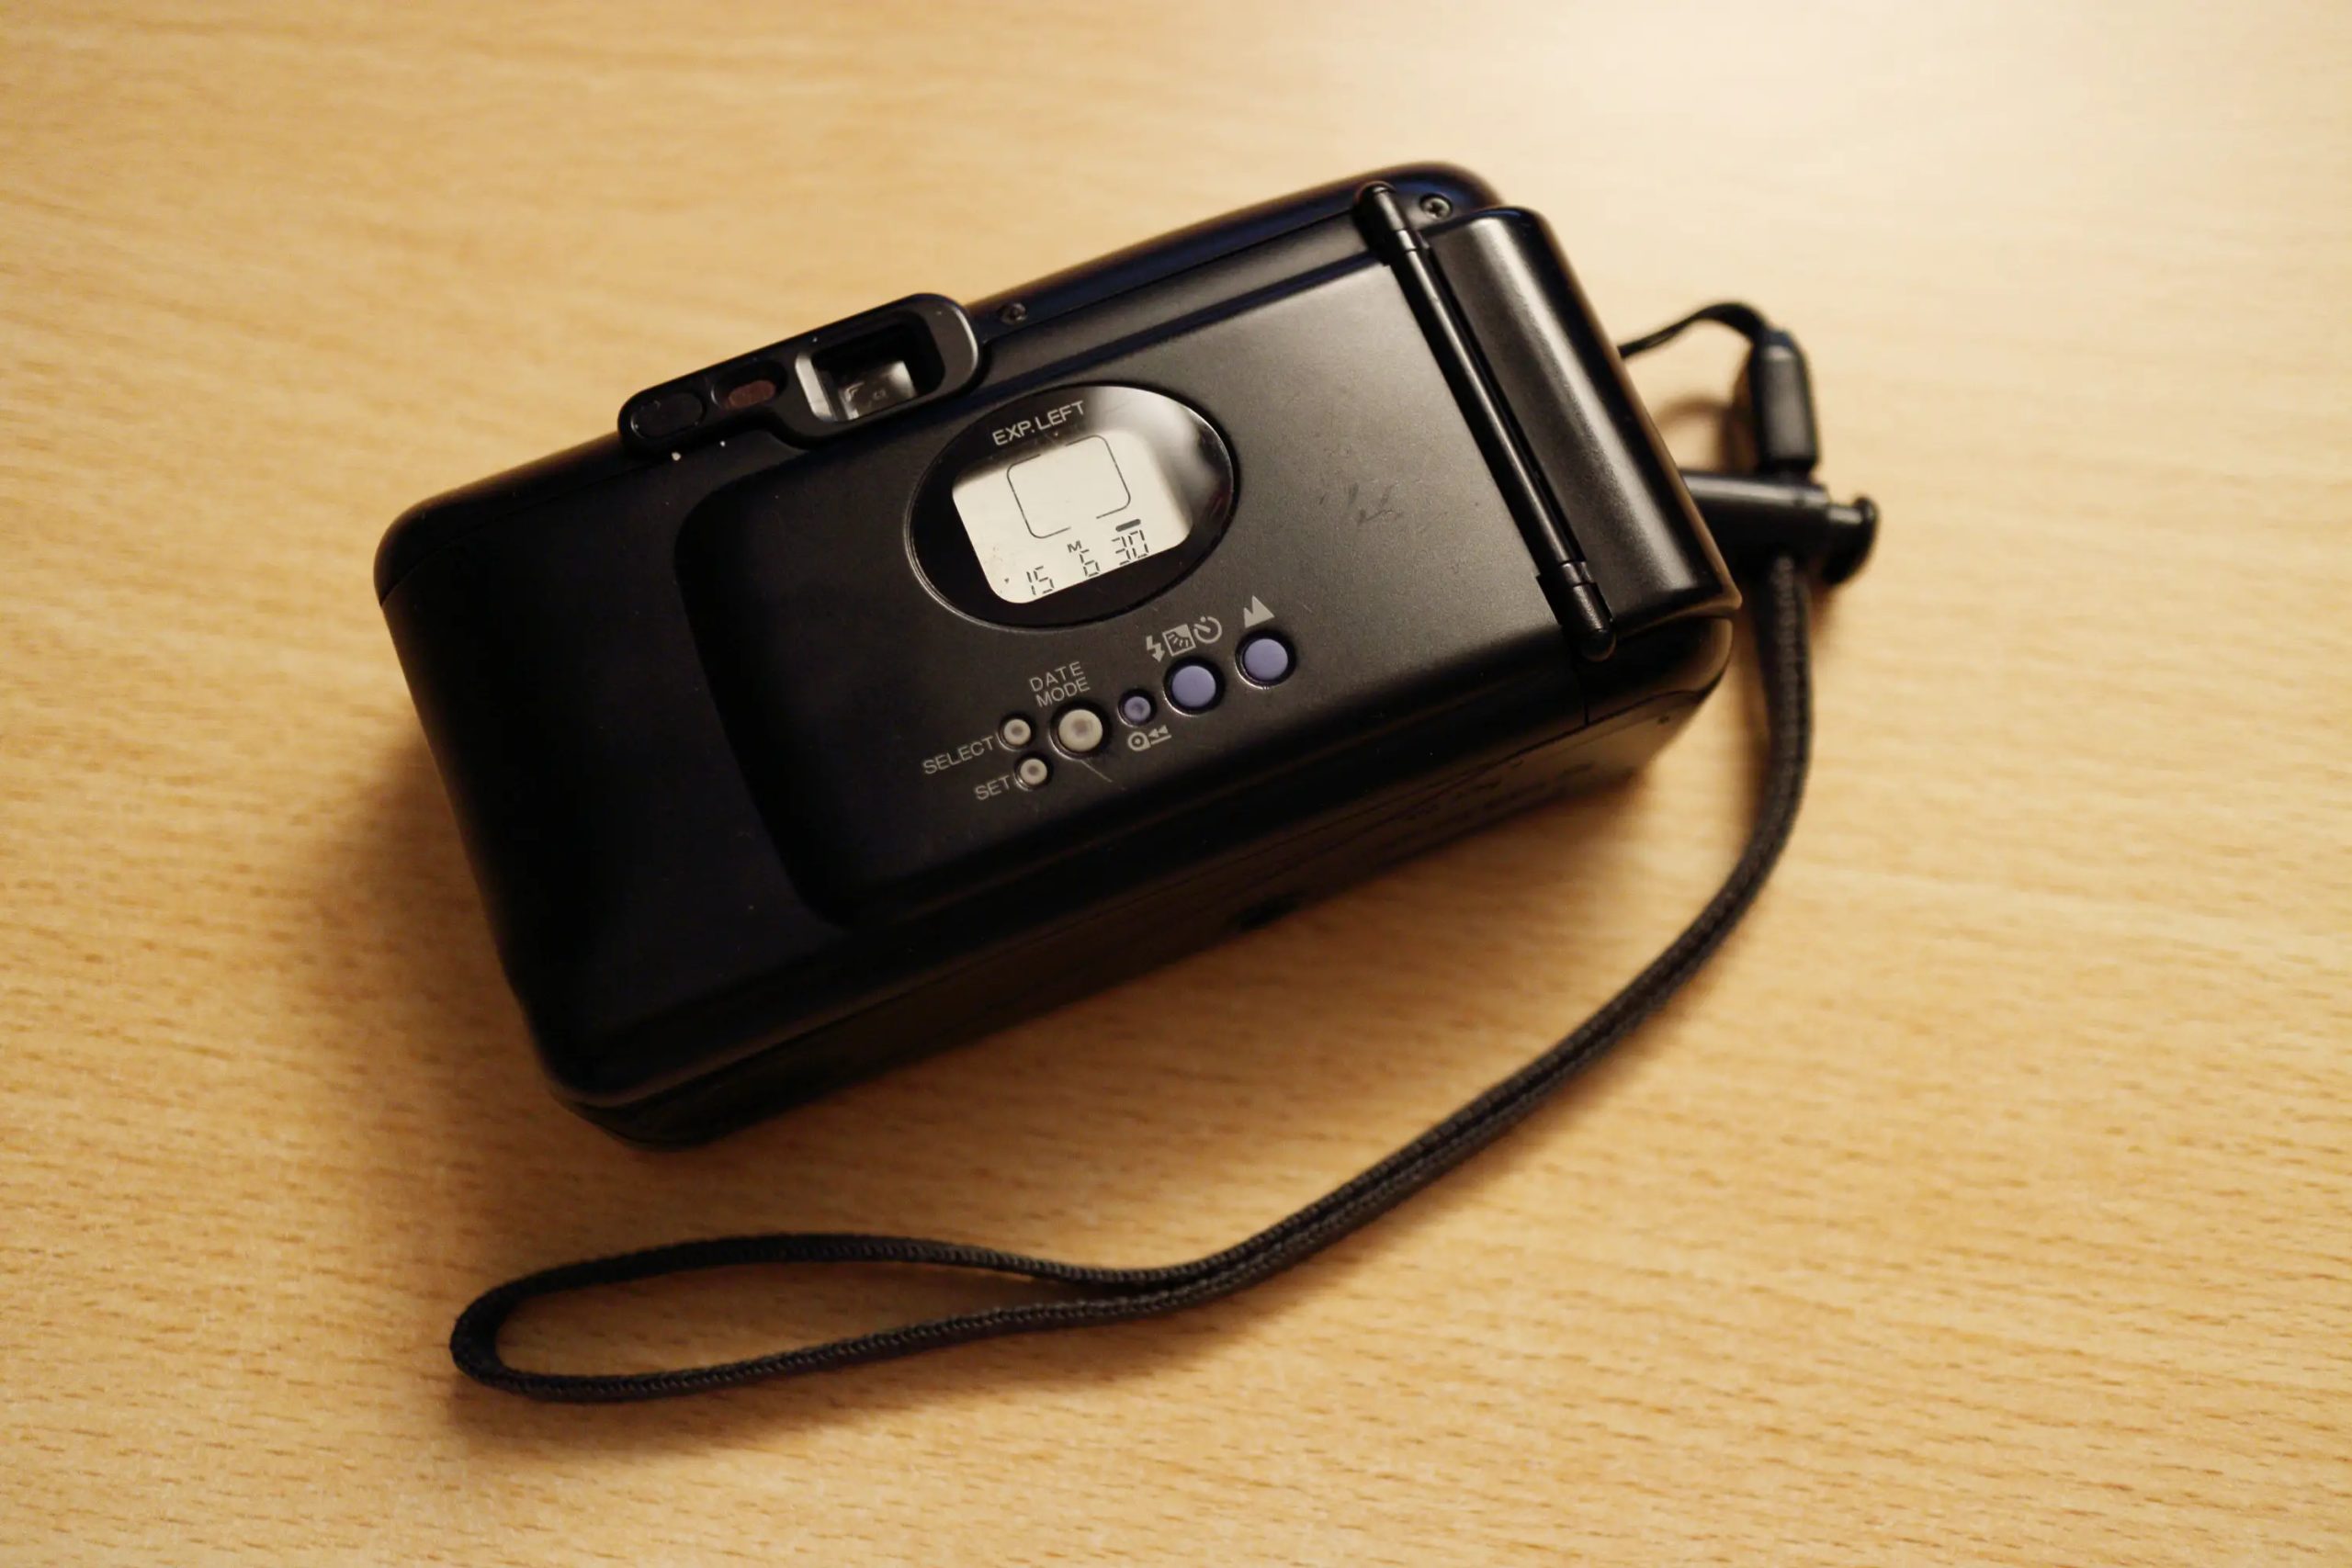 Date displayed on the back. Other information is displayed as well. Number of frames left, infinity focus and flash mode. Film is not loaded so it does not show the number of exposures left and film load/rewind indicator.